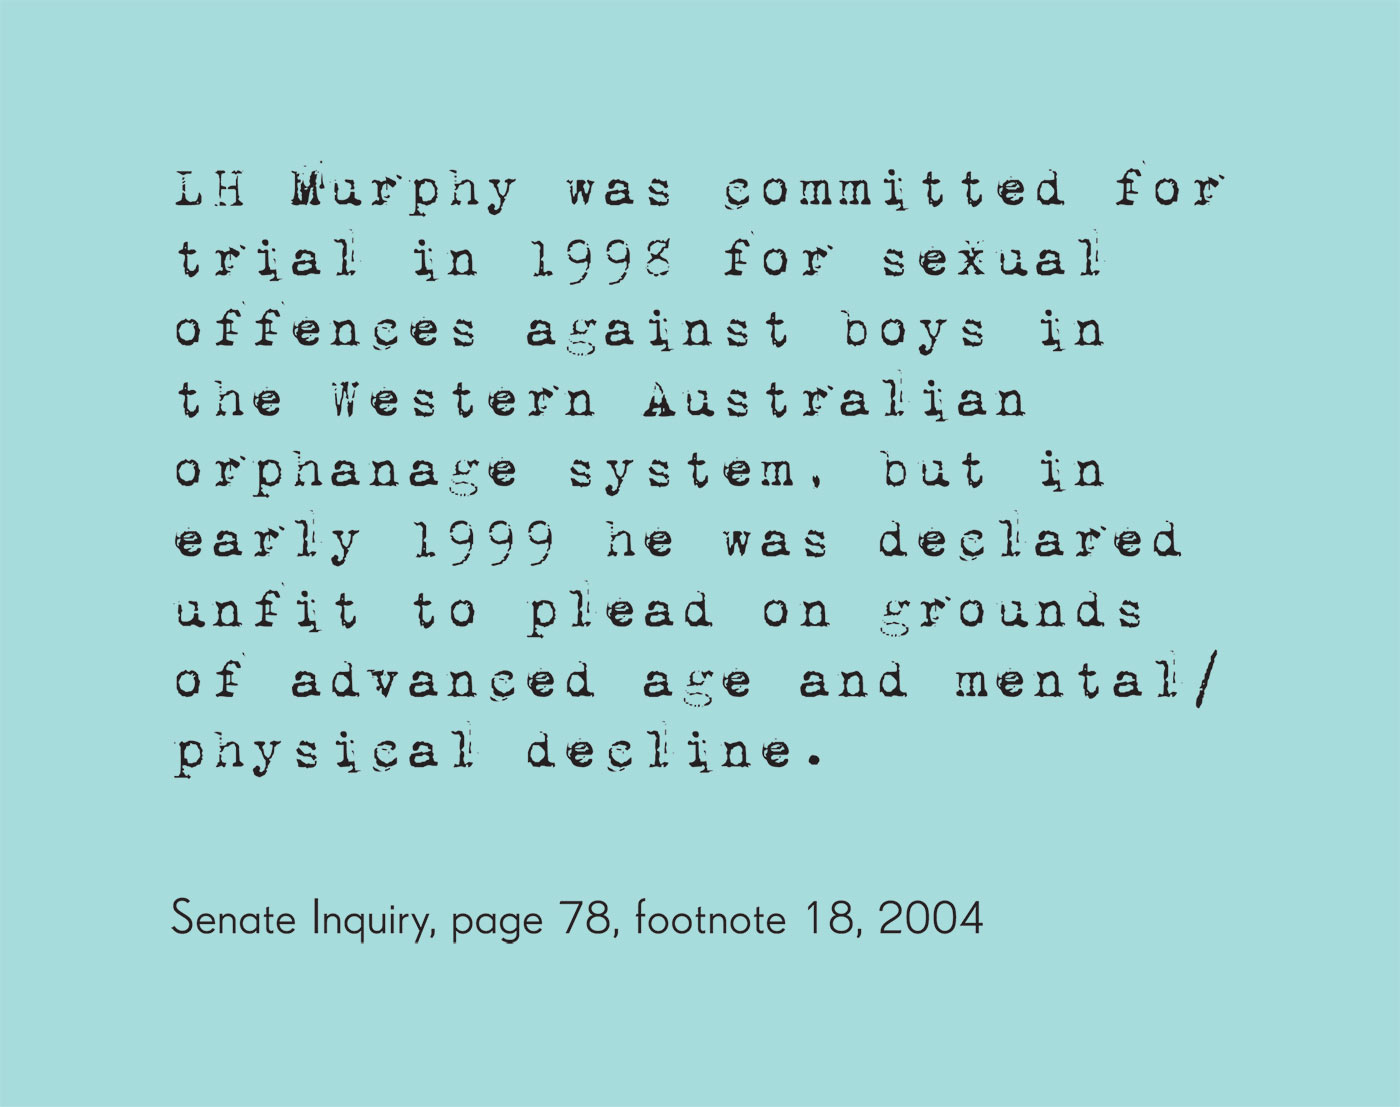 Exhibition graphic panel that reads: 'LH Murphy was committed for trial in 1998 for sexual offences against boys in the Western Australian orphanage system, but in early 1999 he was declared unfit to plead on grounds of advanced age and mental/physical decline' attributed to 'Senate Inquiry, page 78, footnote 18, 2004'. - click to view larger image